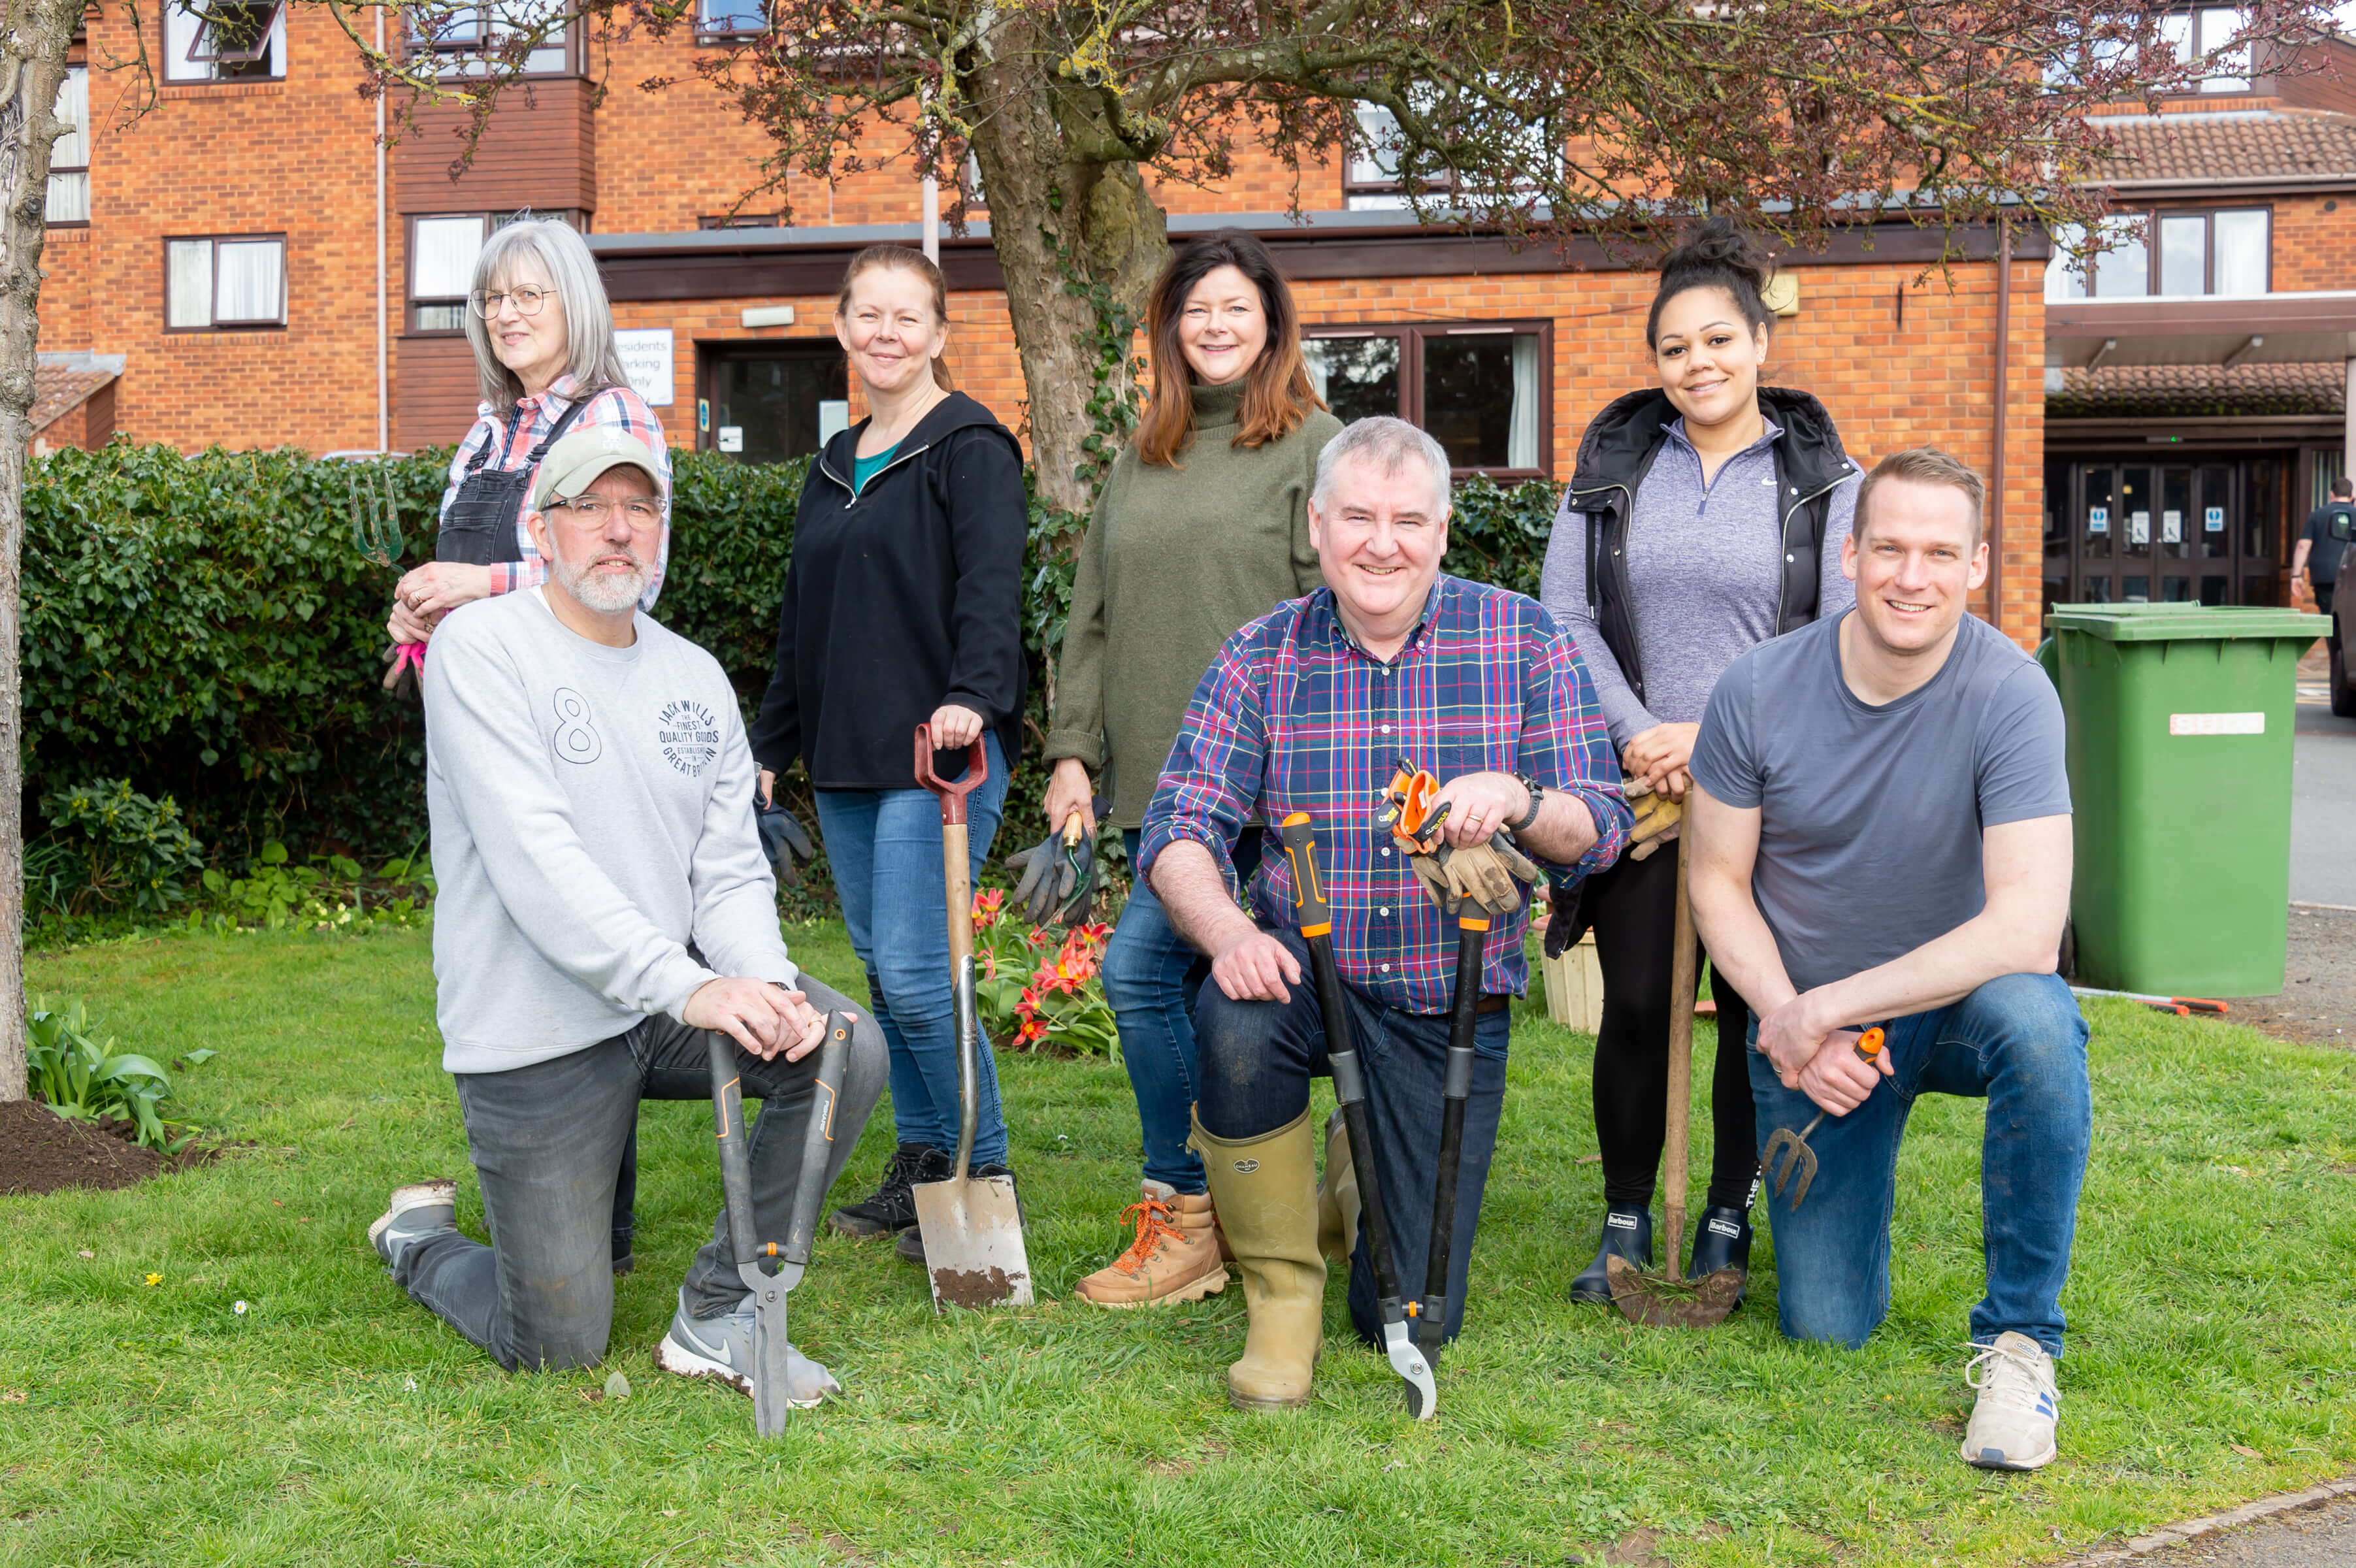 seven people on a green lawn smiling holding garden tools